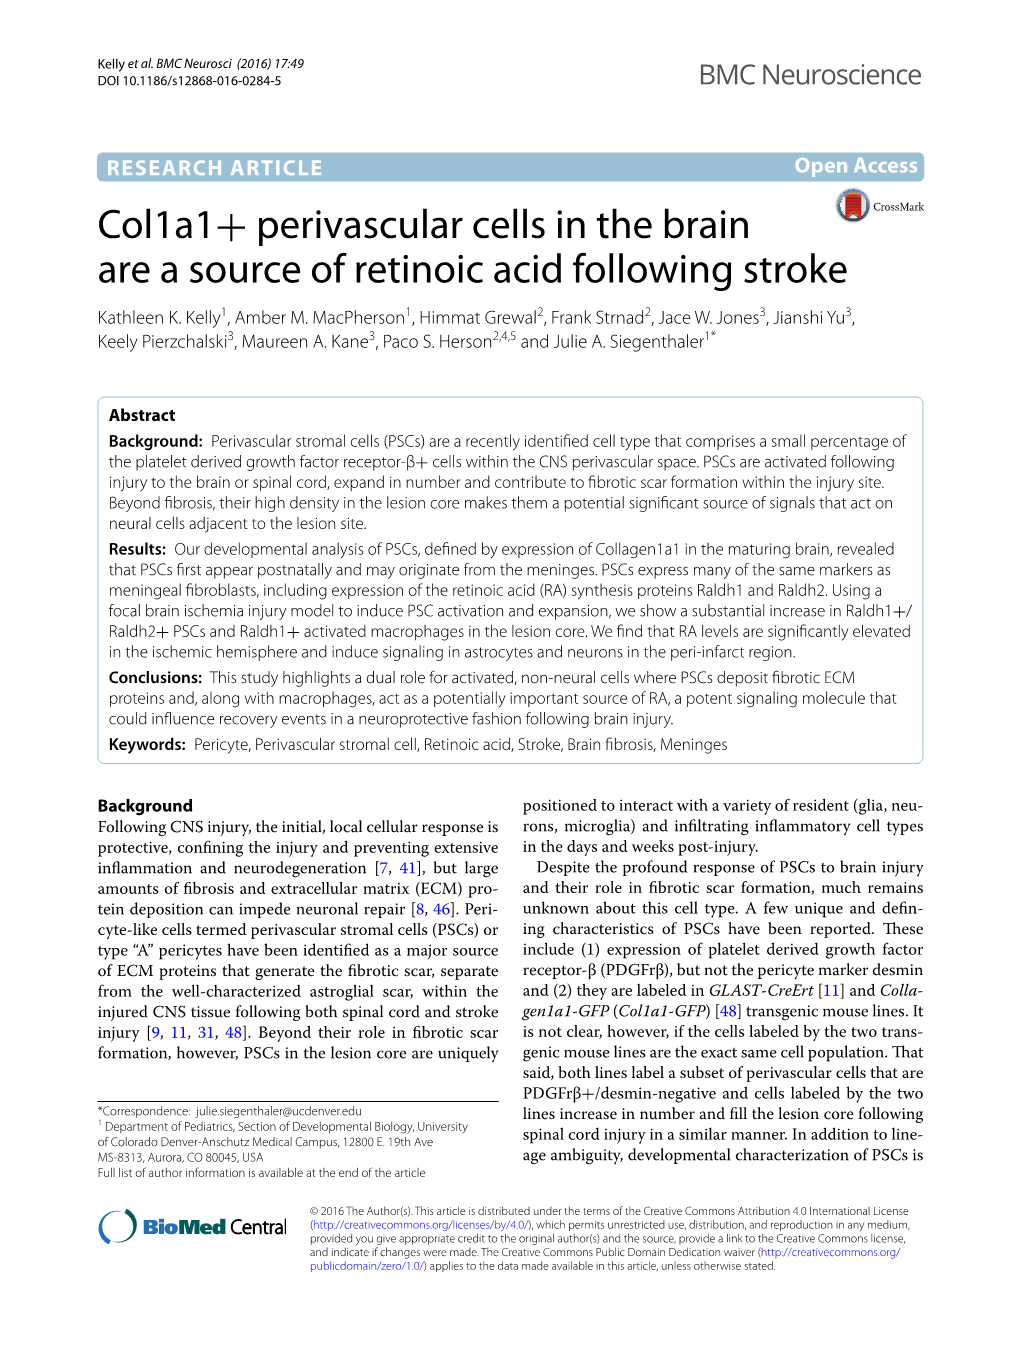 Col1a1+ Perivascular Cells in the Brain Are a Source of Retinoic Acid Following Stroke